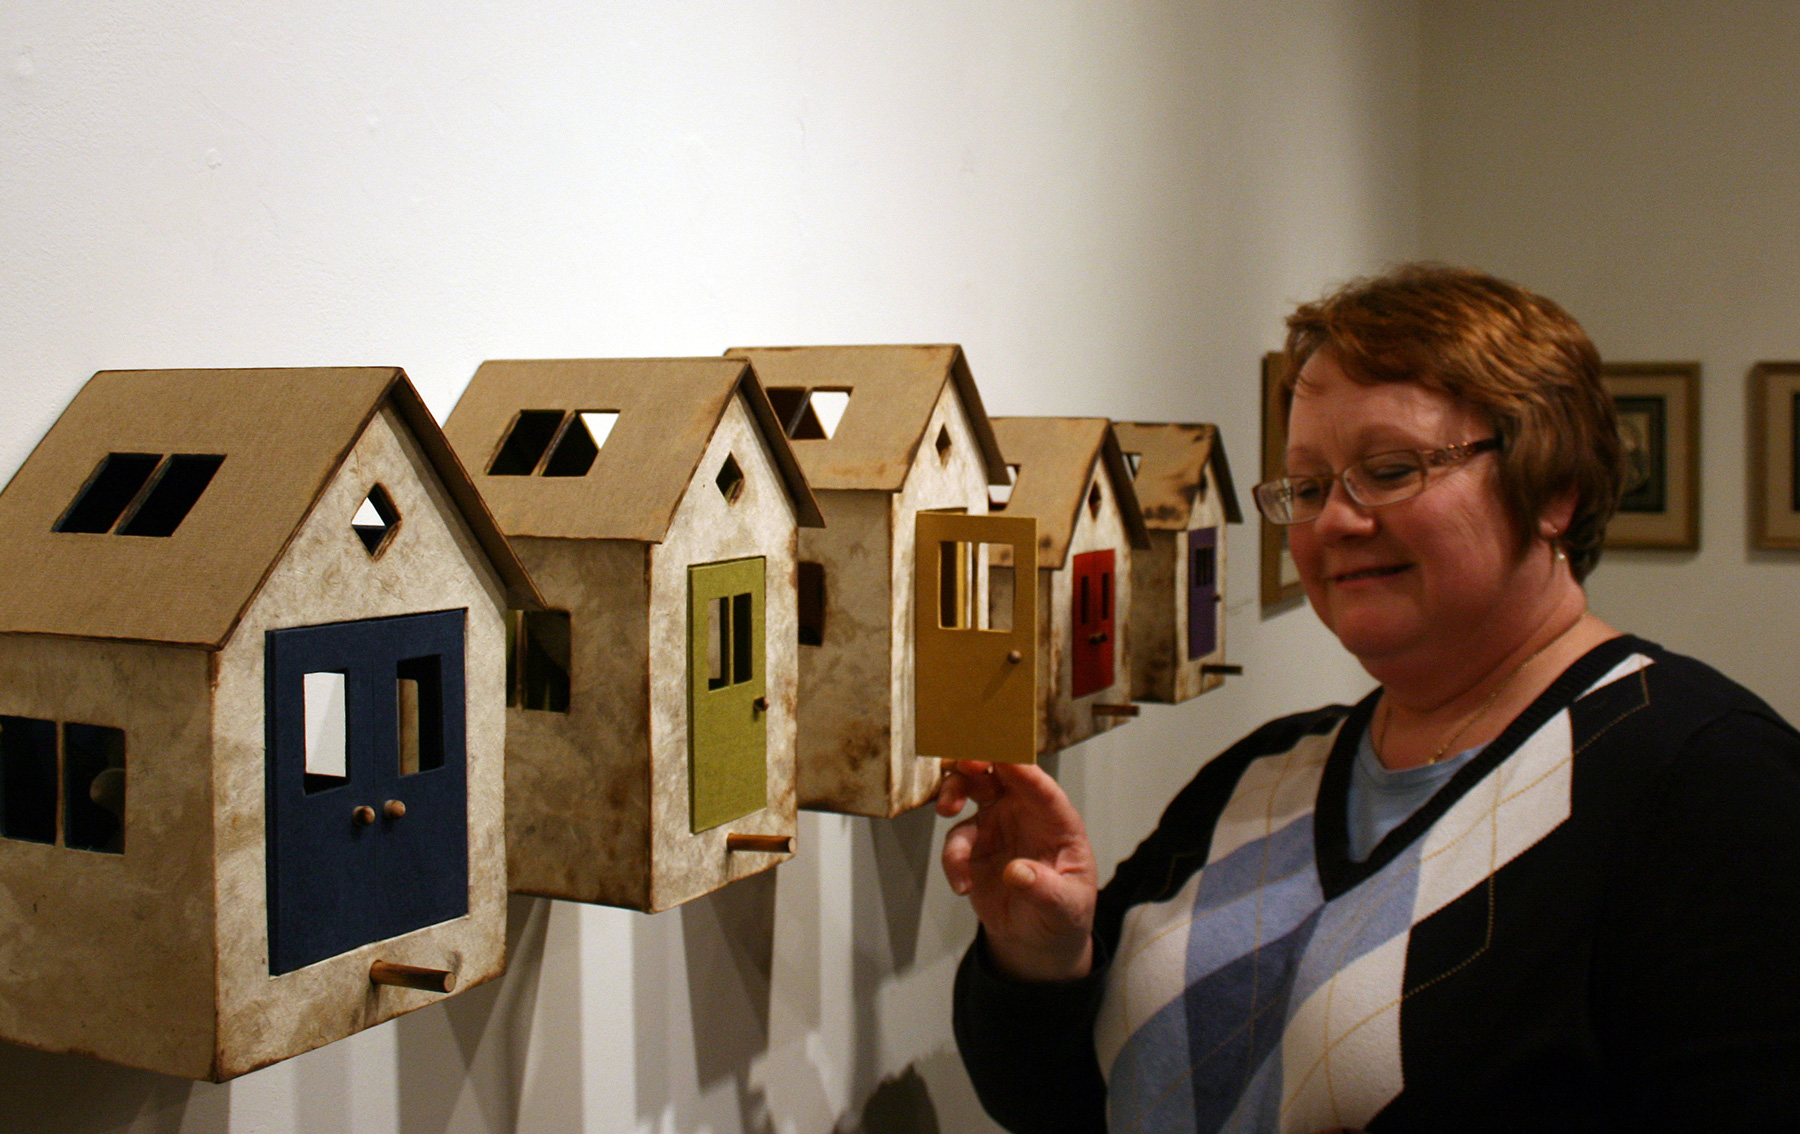 Birdhouses: 1 to 7 (Small Shelter for Secrets)